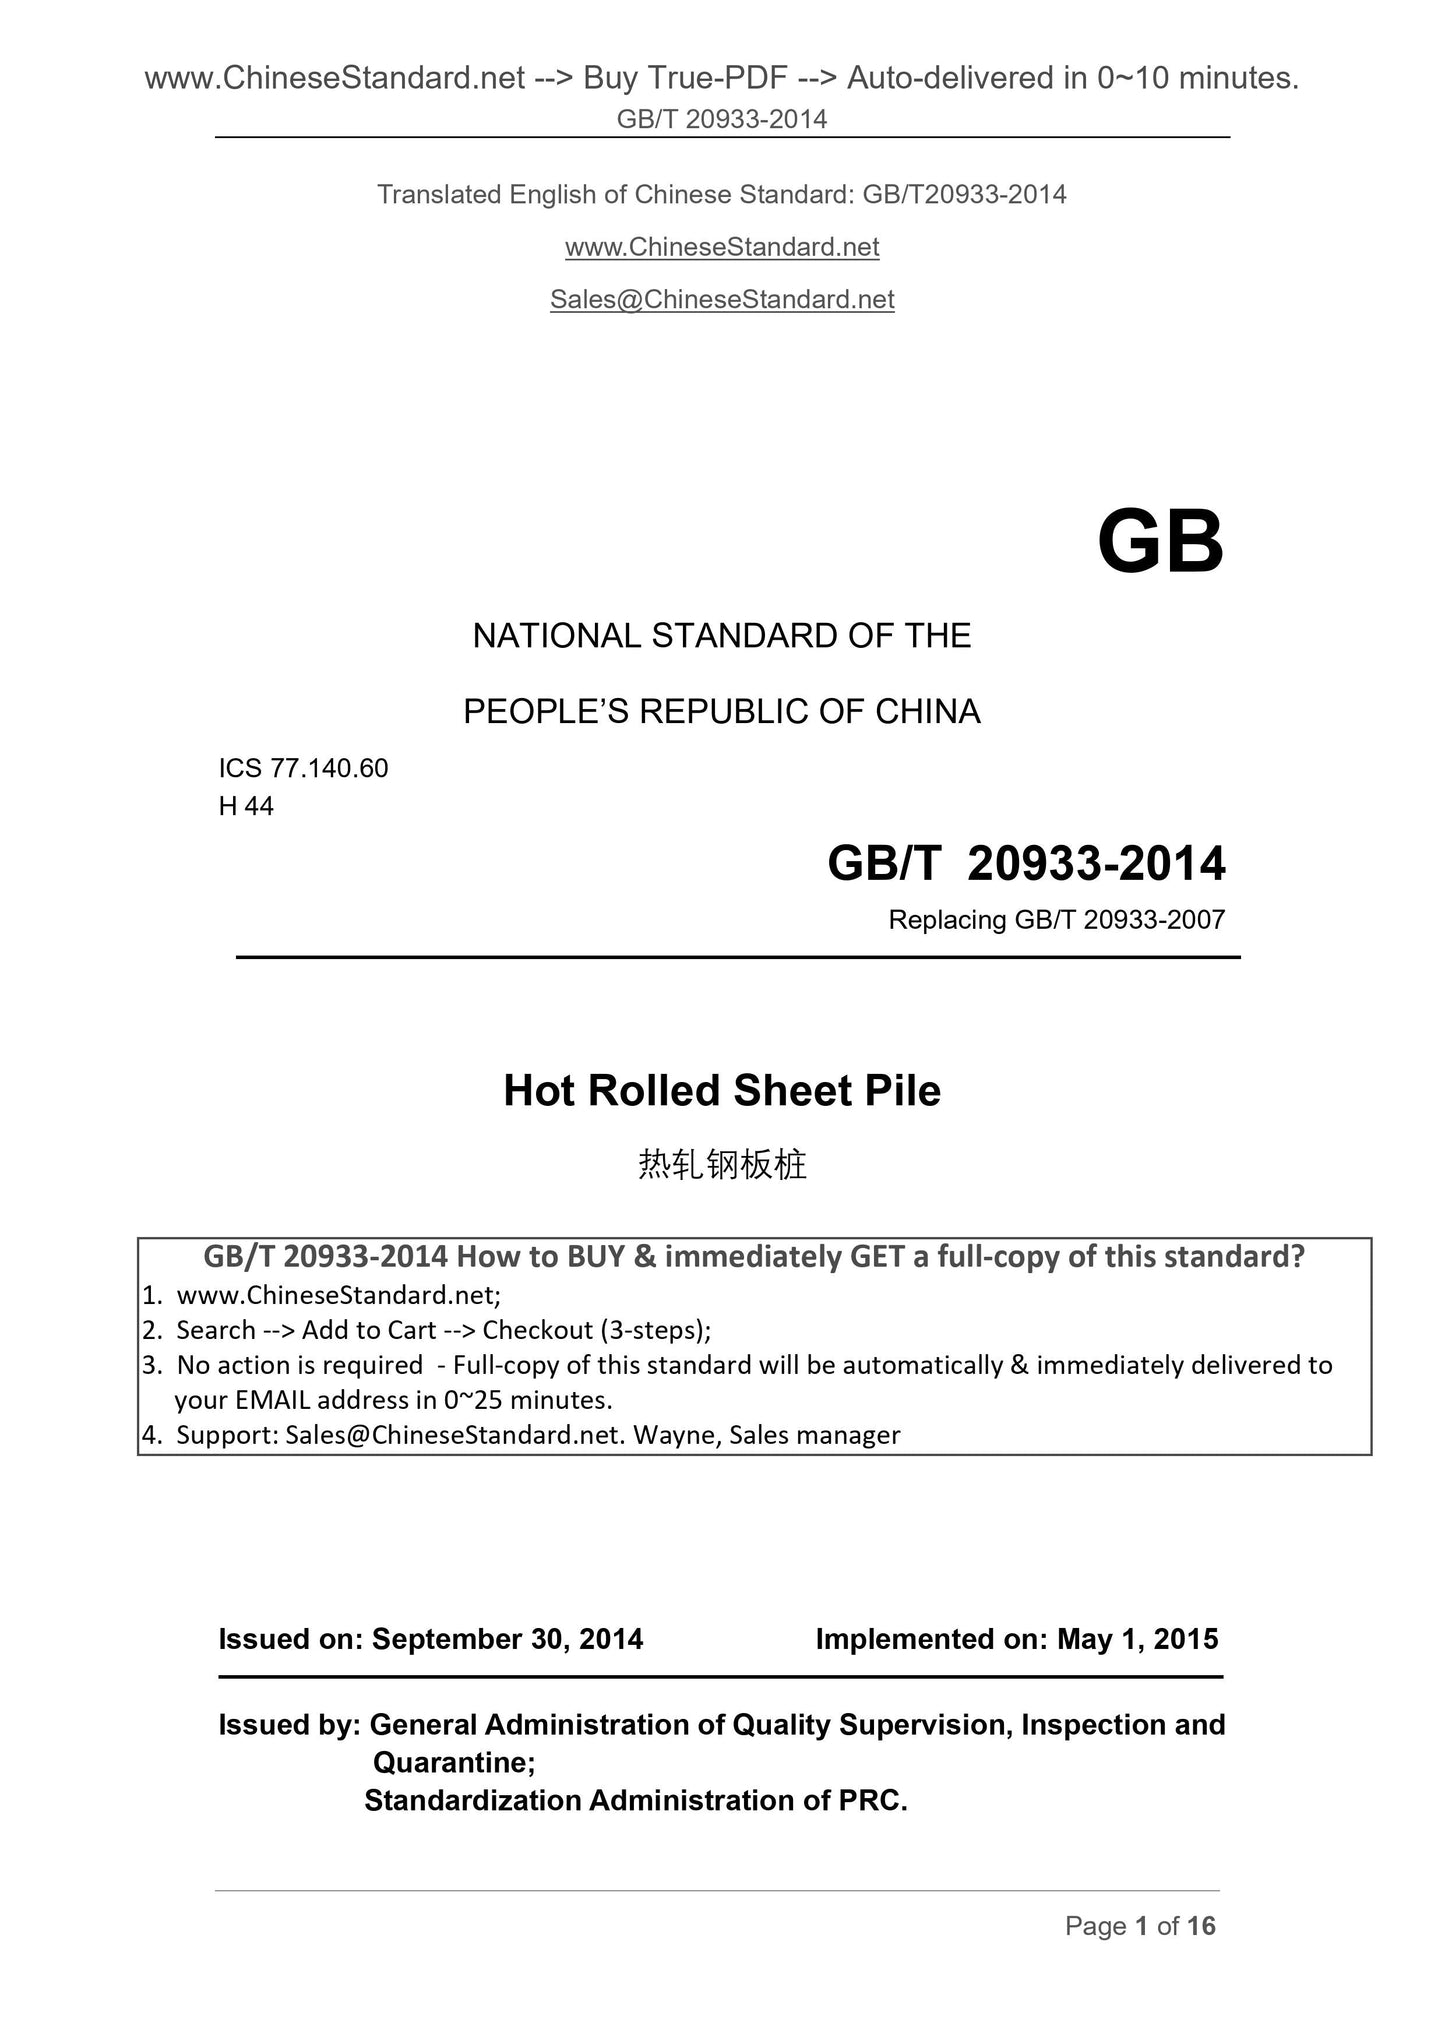 GB/T 20933-2014 Page 1